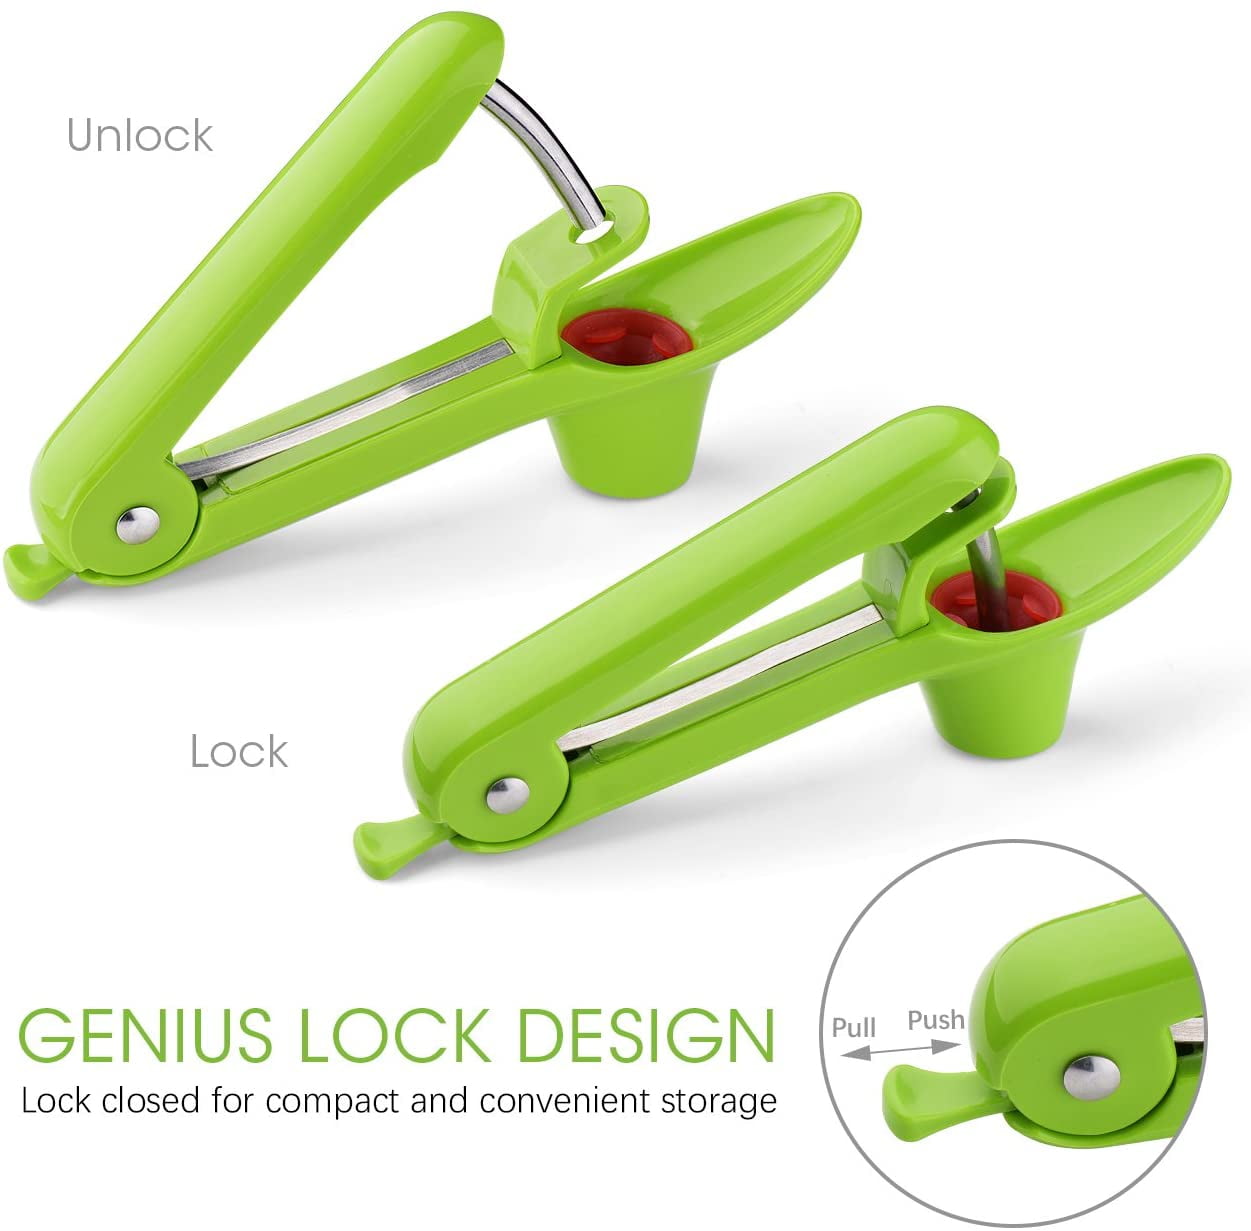 OMorc Cherry Pitter Cherry Stoner with Food-Grade Silicone Cup and Lengthened splatter shield Dishwasher Safe Space-Saving Lock Design Green 